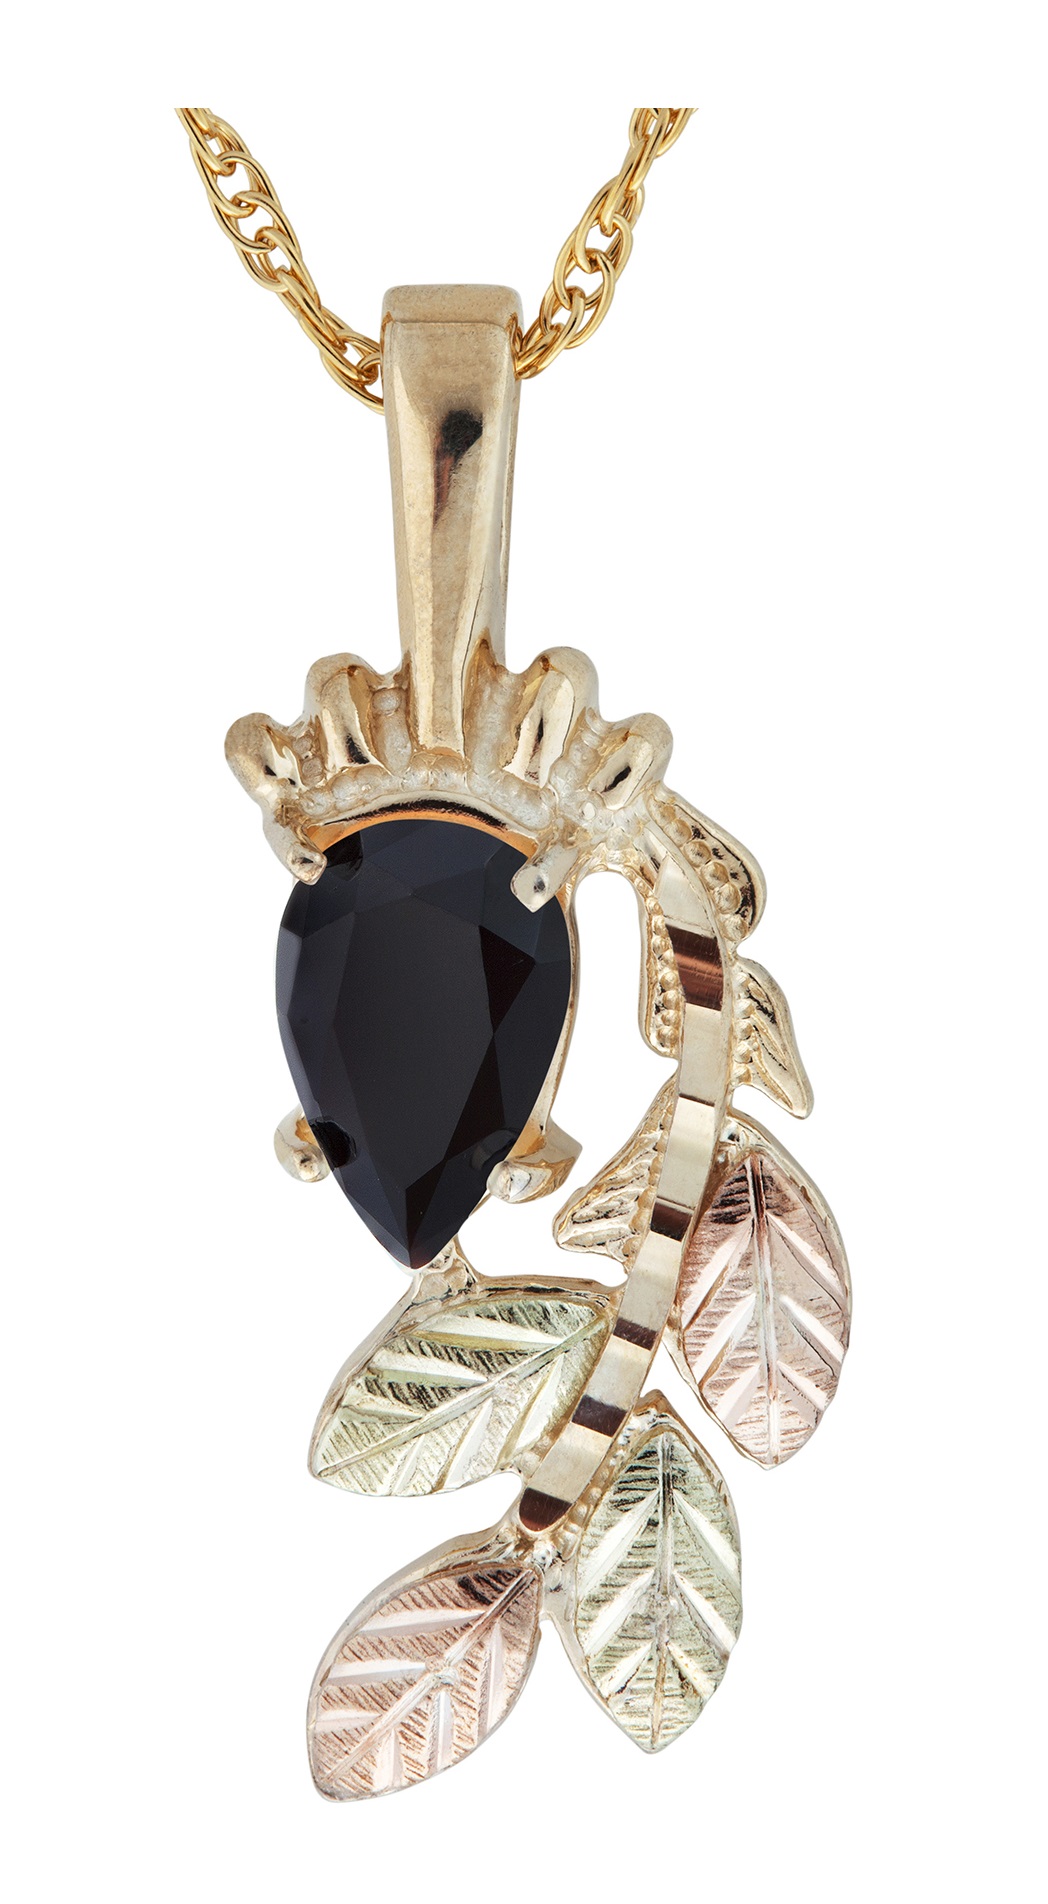 10K Yellow Gold Onyx Pear Shaped Pendant Necklace